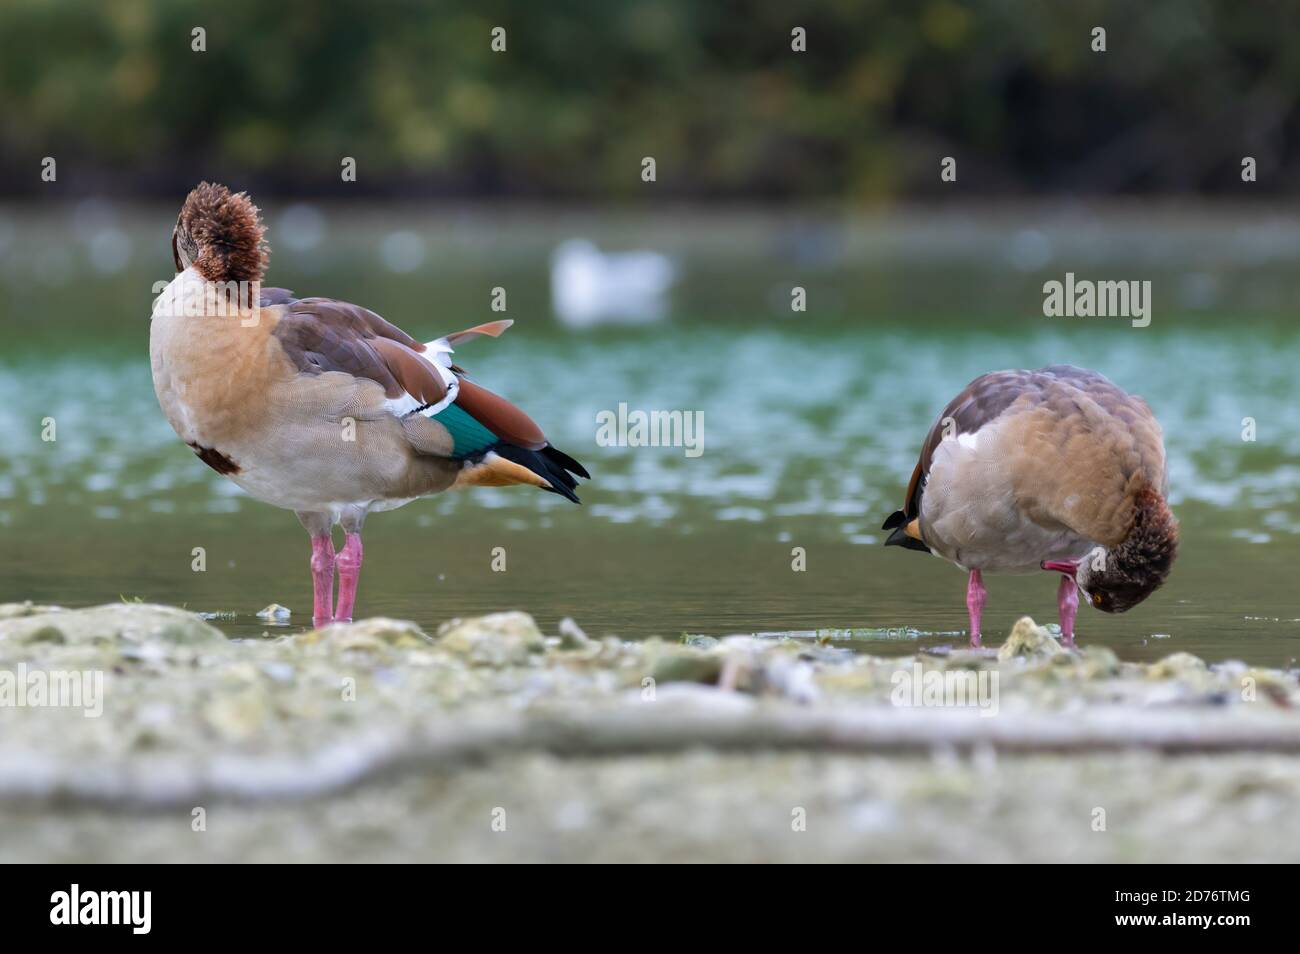 Pair of Egyptian geese (Alopochen aegyptiaca) standing in water by a lake in Autumn preening (cleaning) themselves, in West Sussex, England, UK. Stock Photo